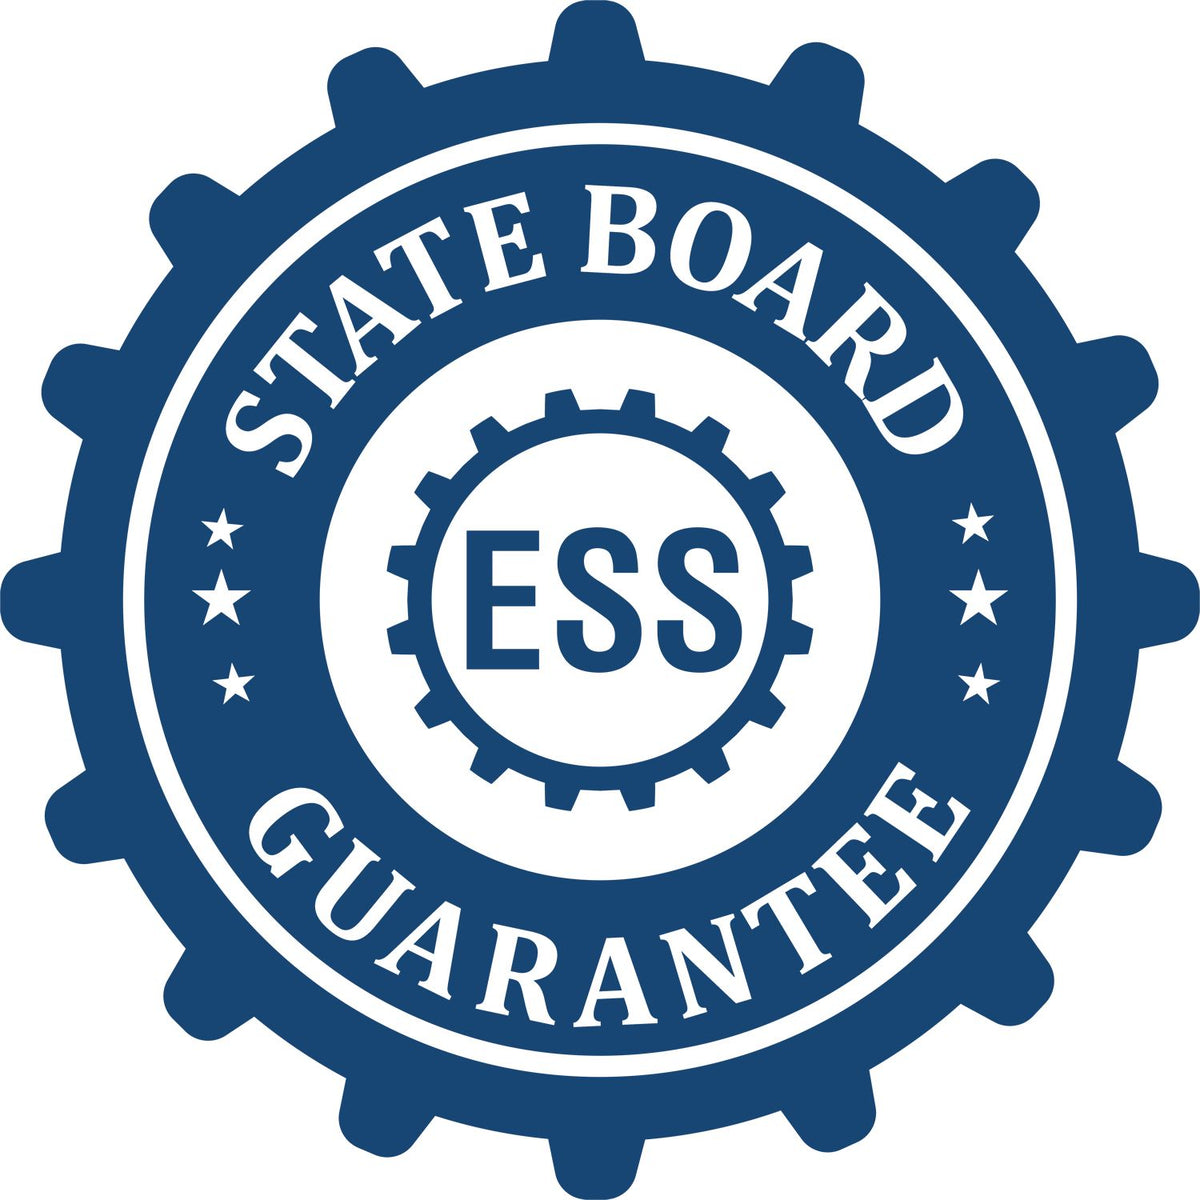 An emblem in a gear shape illustrating a state board guarantee for the Premium MaxLight Pre-Inked Montana Engineering Stamp product.